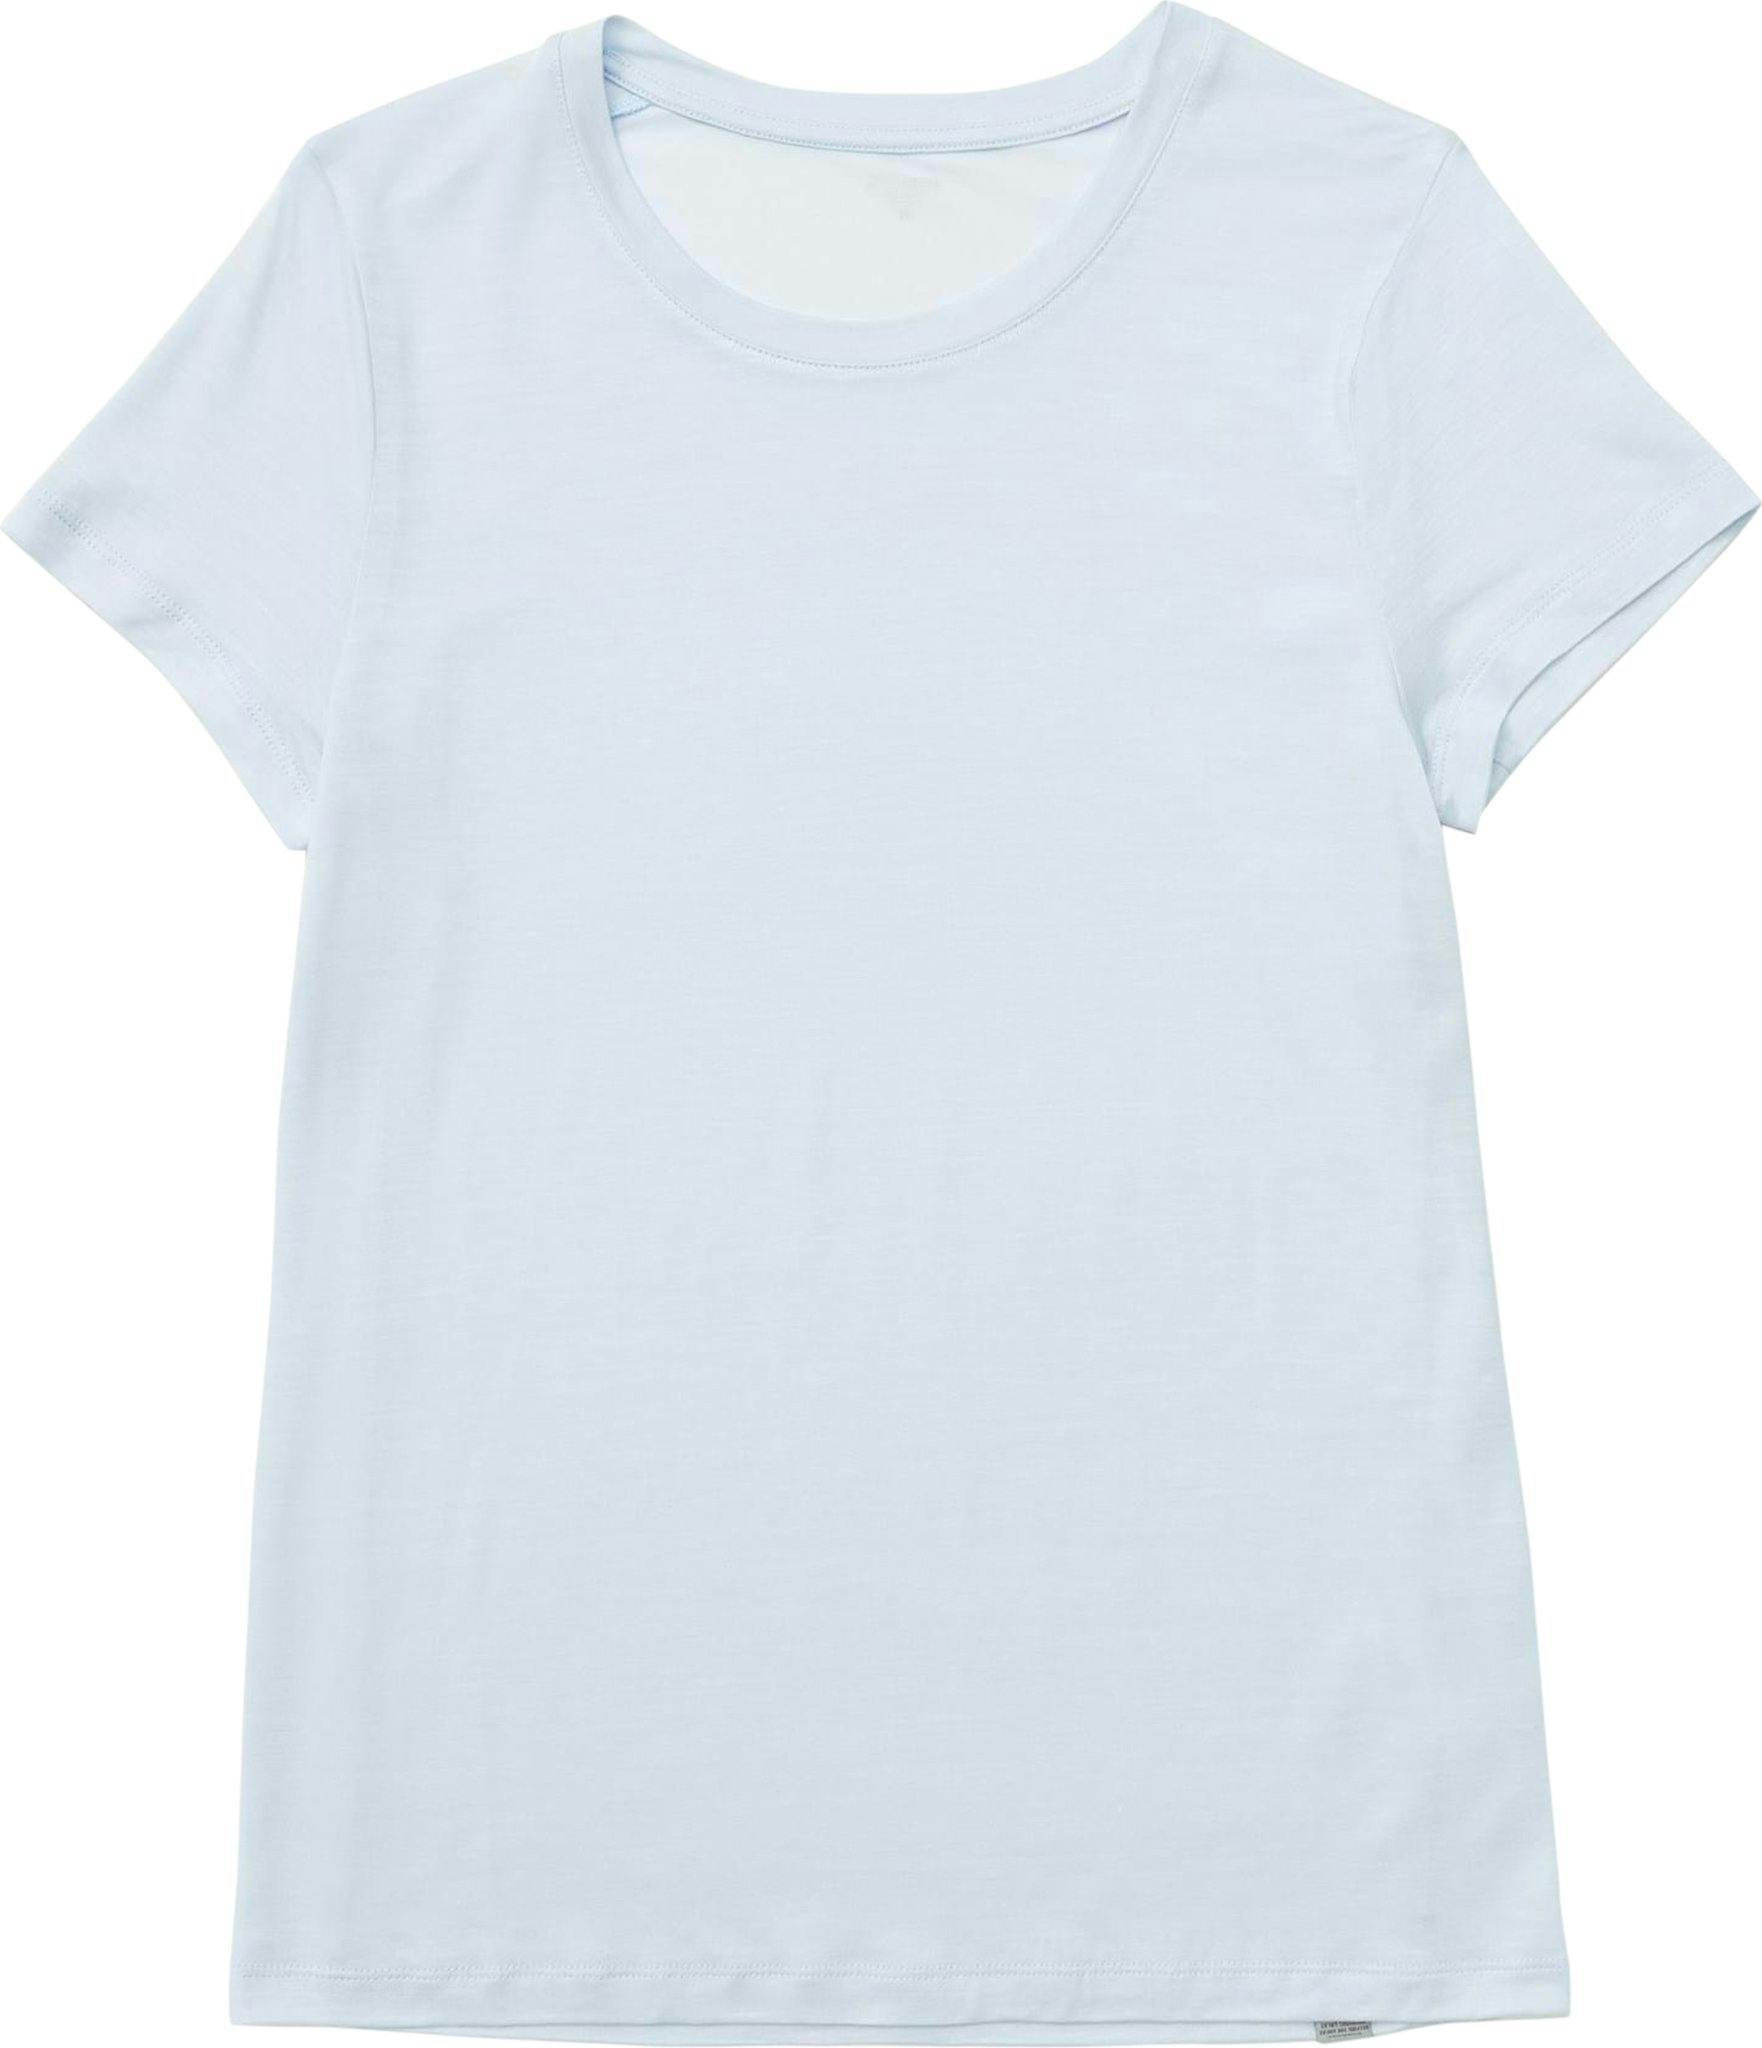 Product image for Tree Tee - Women's